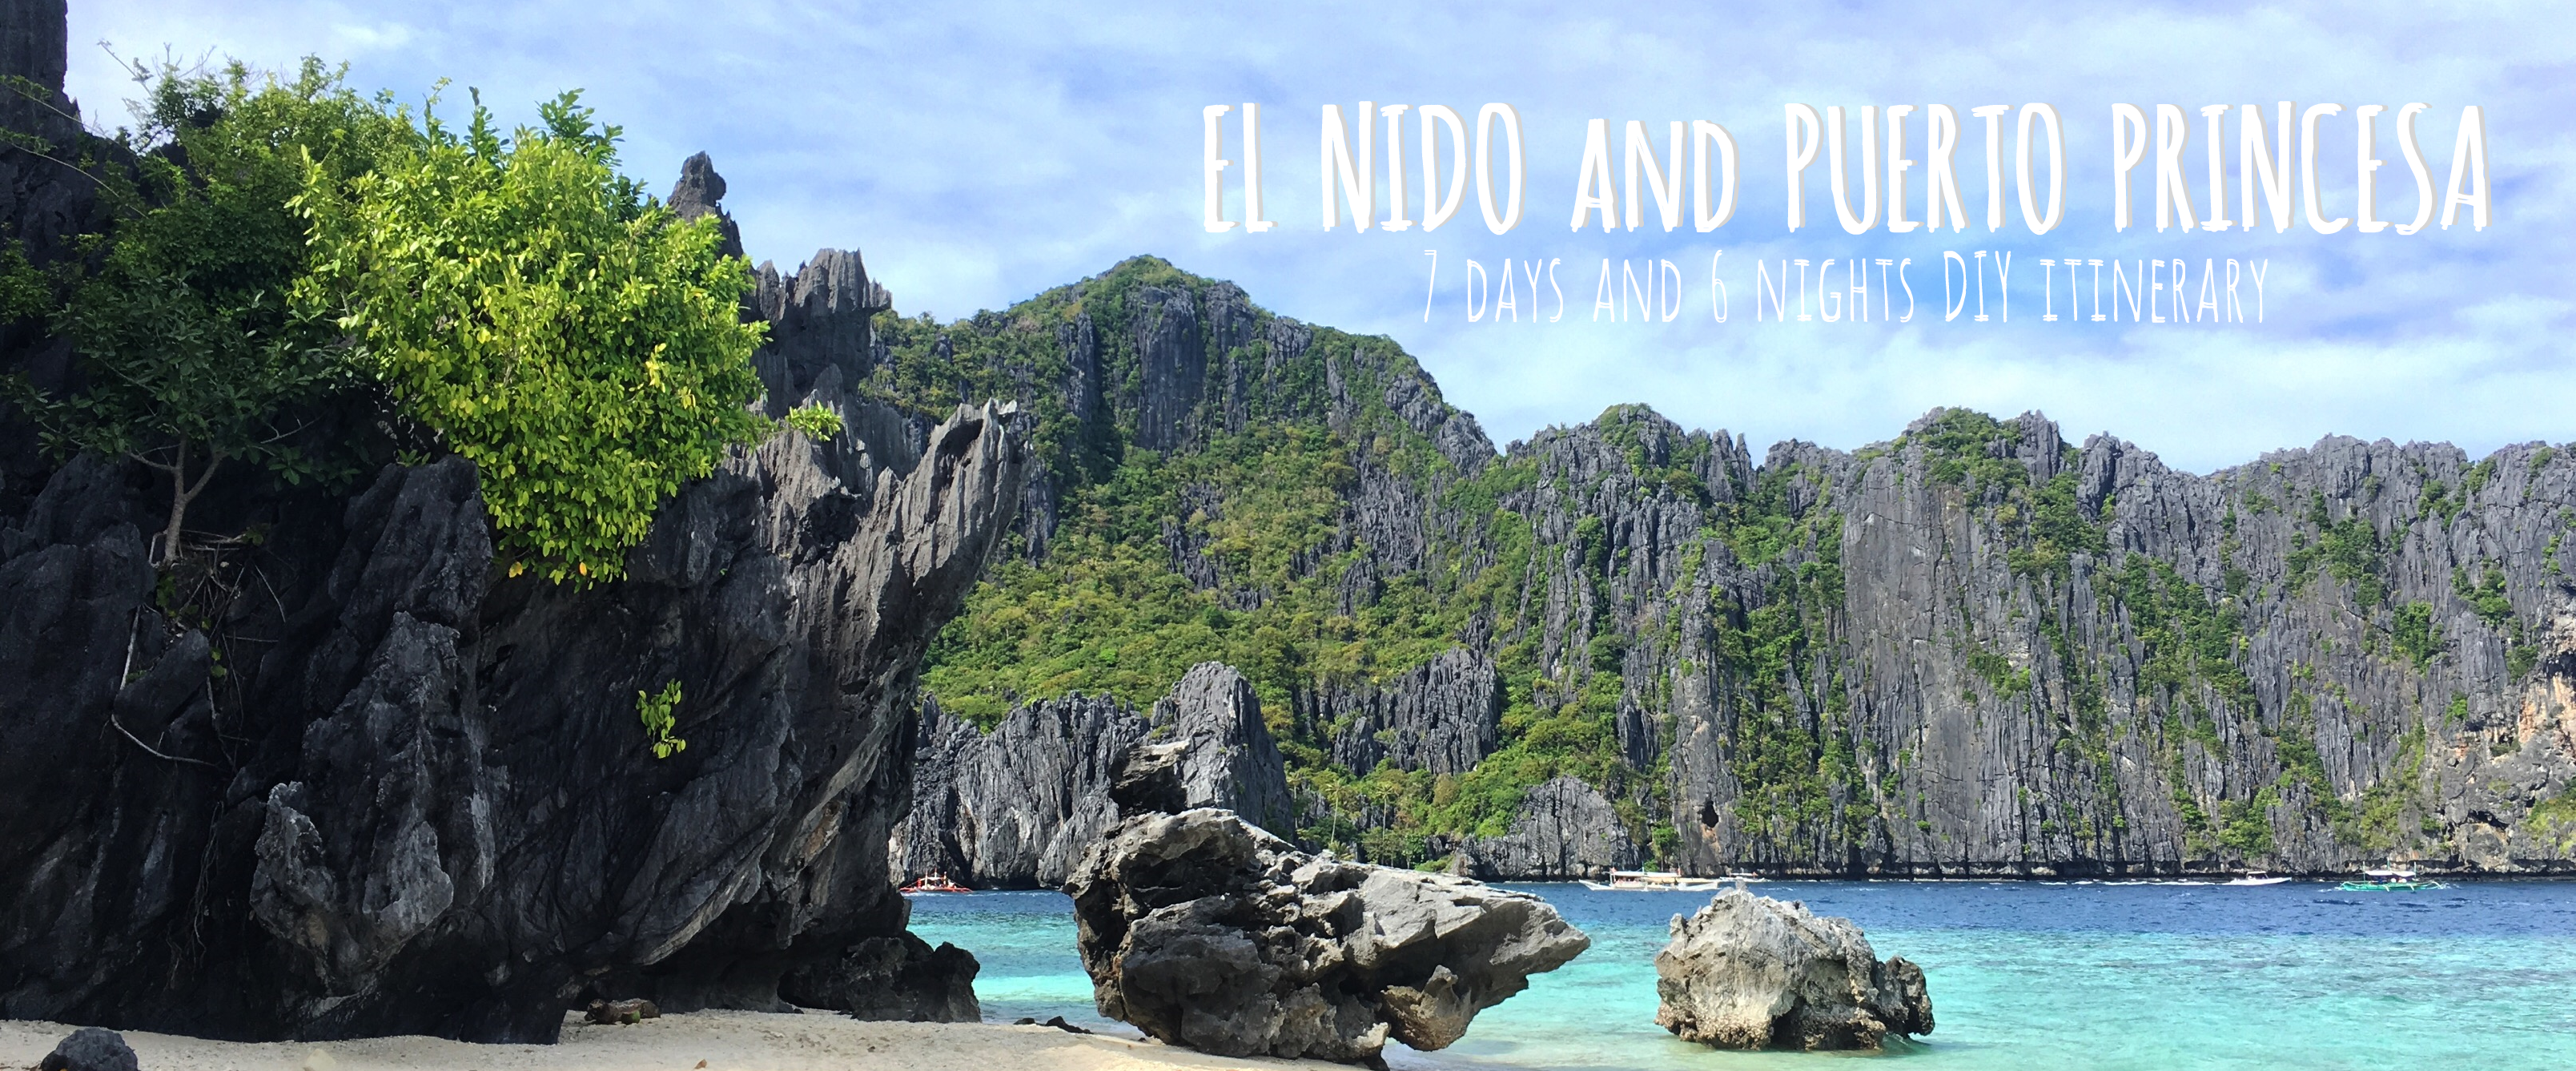 7 Days And 6 Nights Budget Diy Itinerary In Puerto Princesa And El